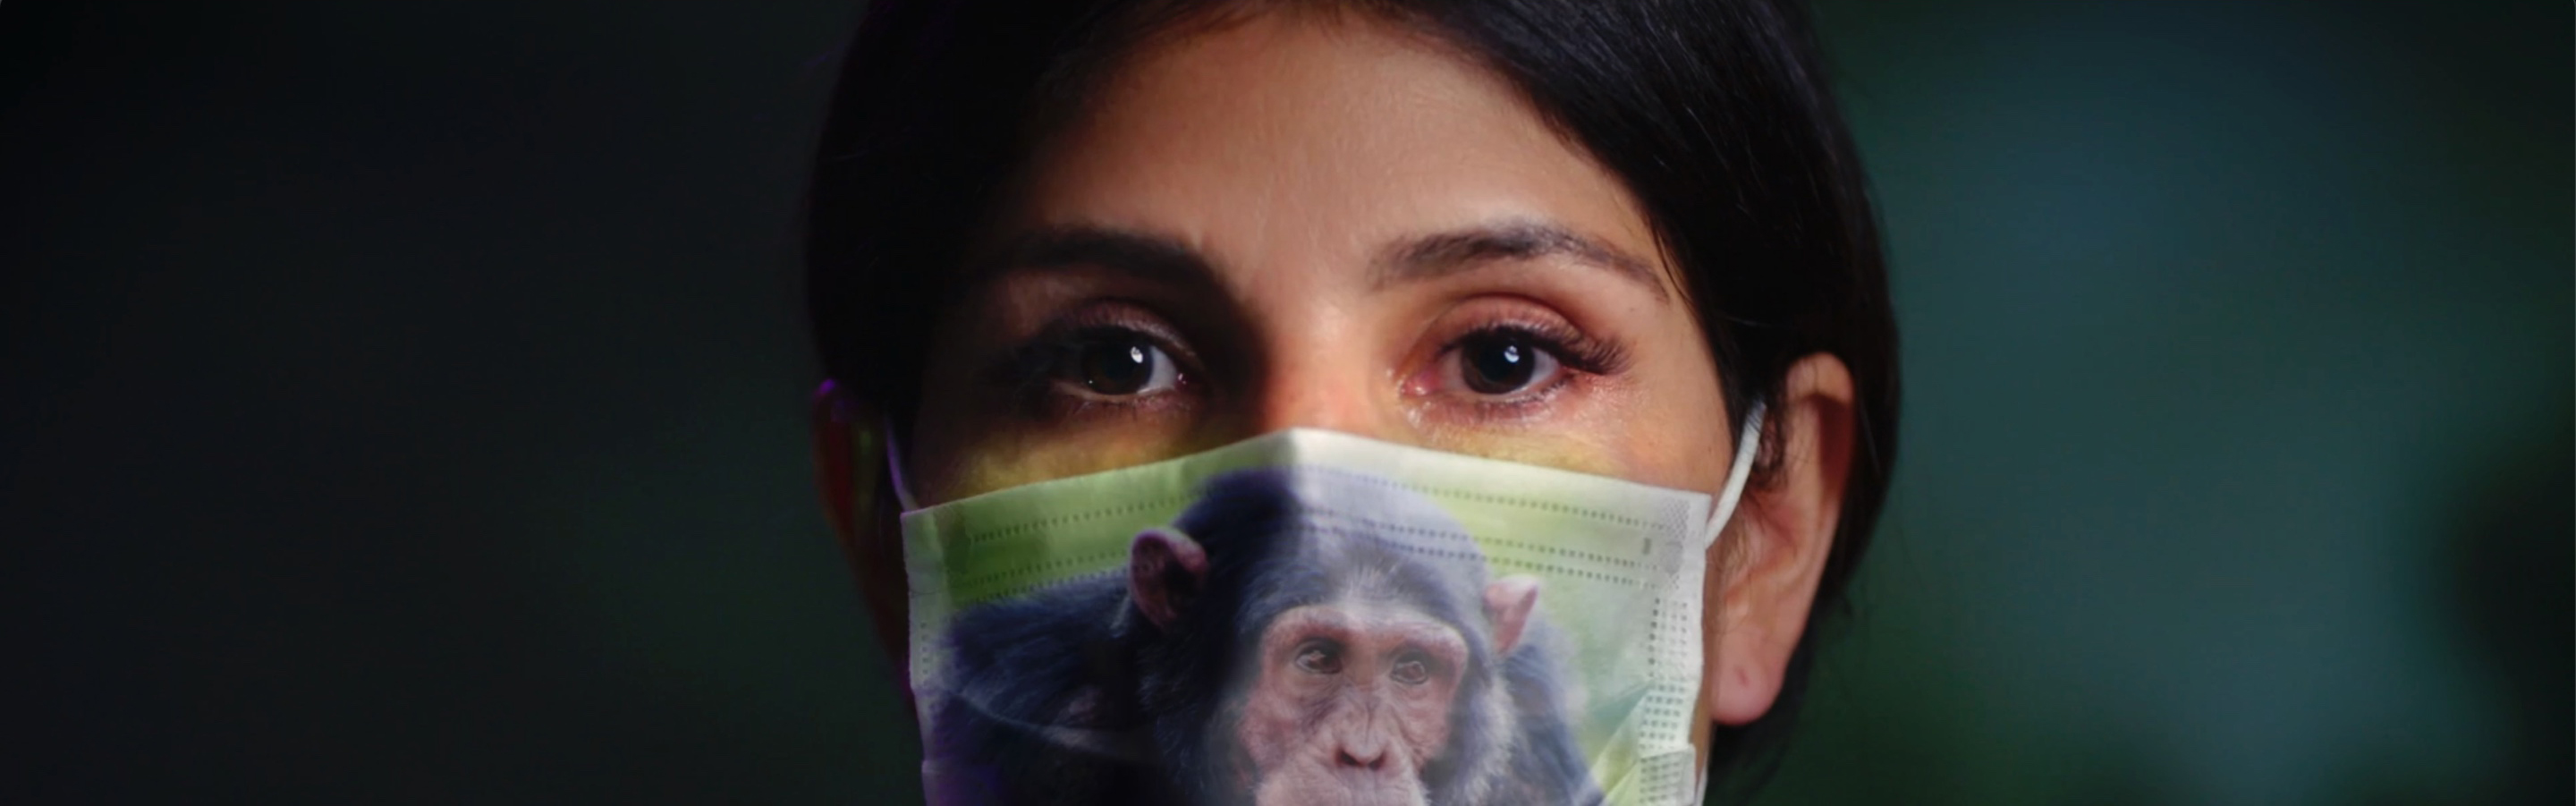 Woman with surgical mask that has the image of a chimpanzee on it